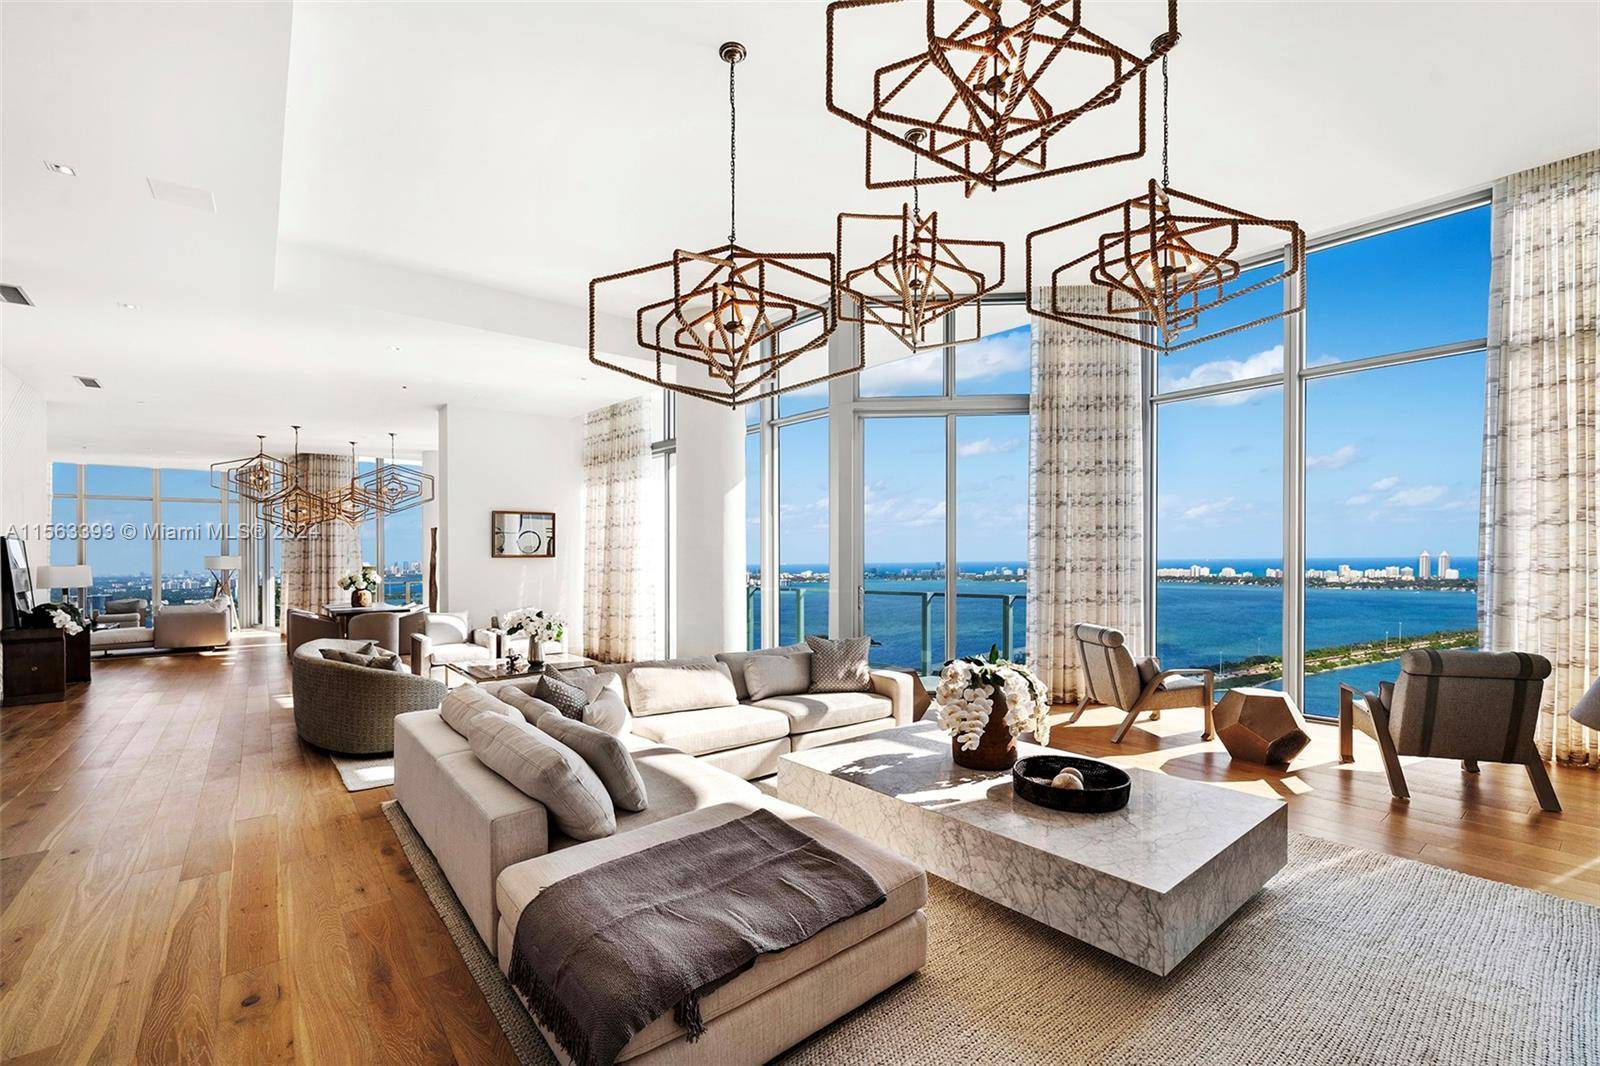 A true penthouse in every sense with 15ft ceilings, a private rooftop pool and nearly 8, 000sf interior, and over 2, 000sf exterior space.